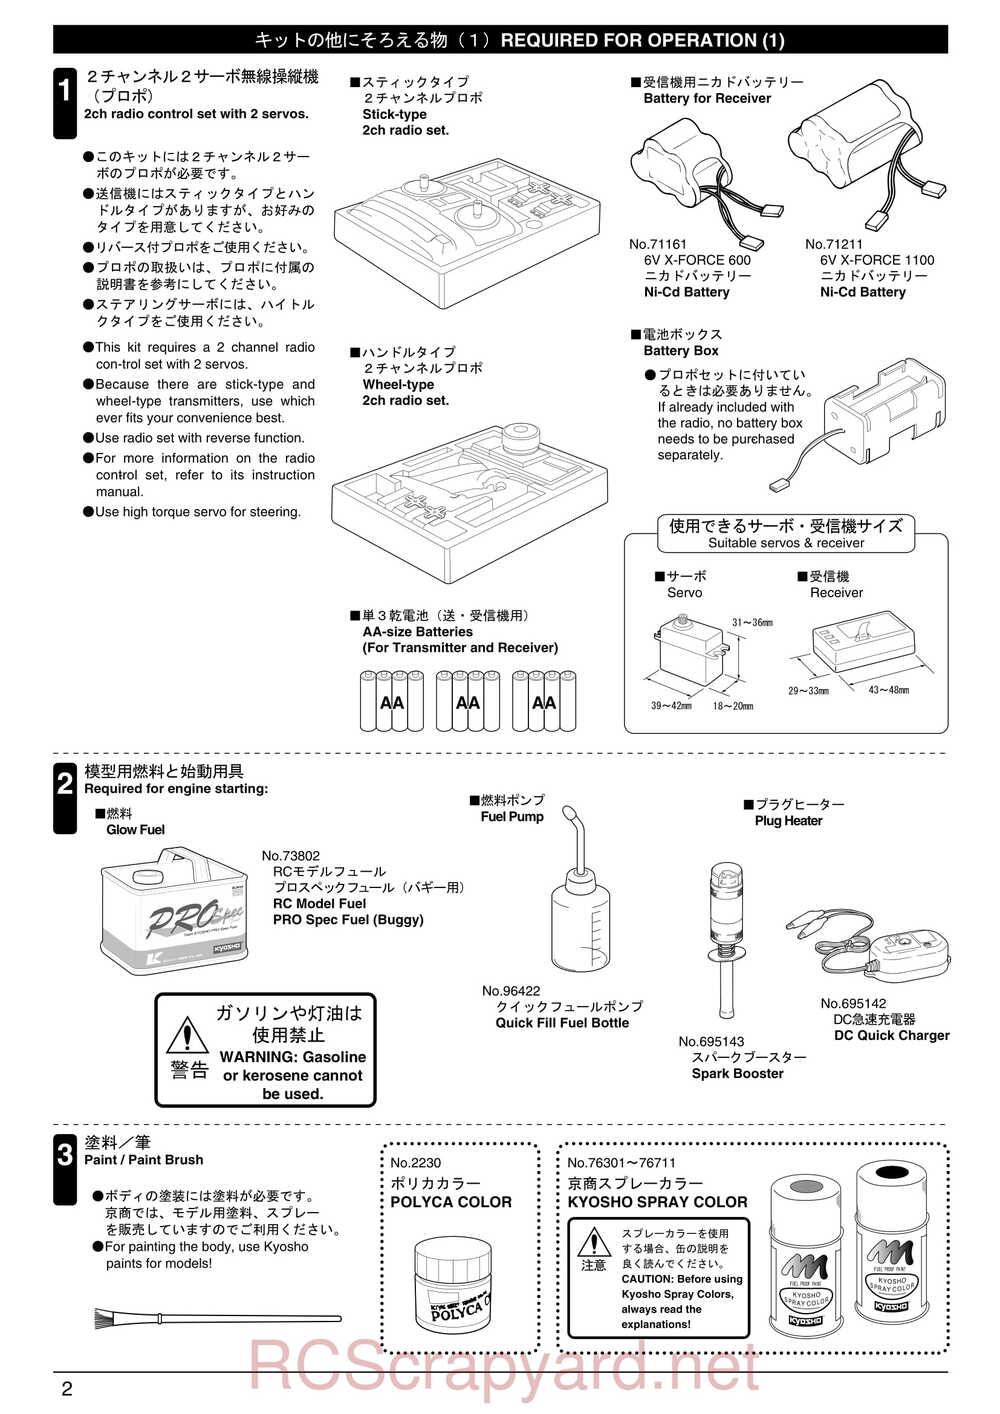 Kyosho - 31224 - Mad-Armour - Manual - Page 02